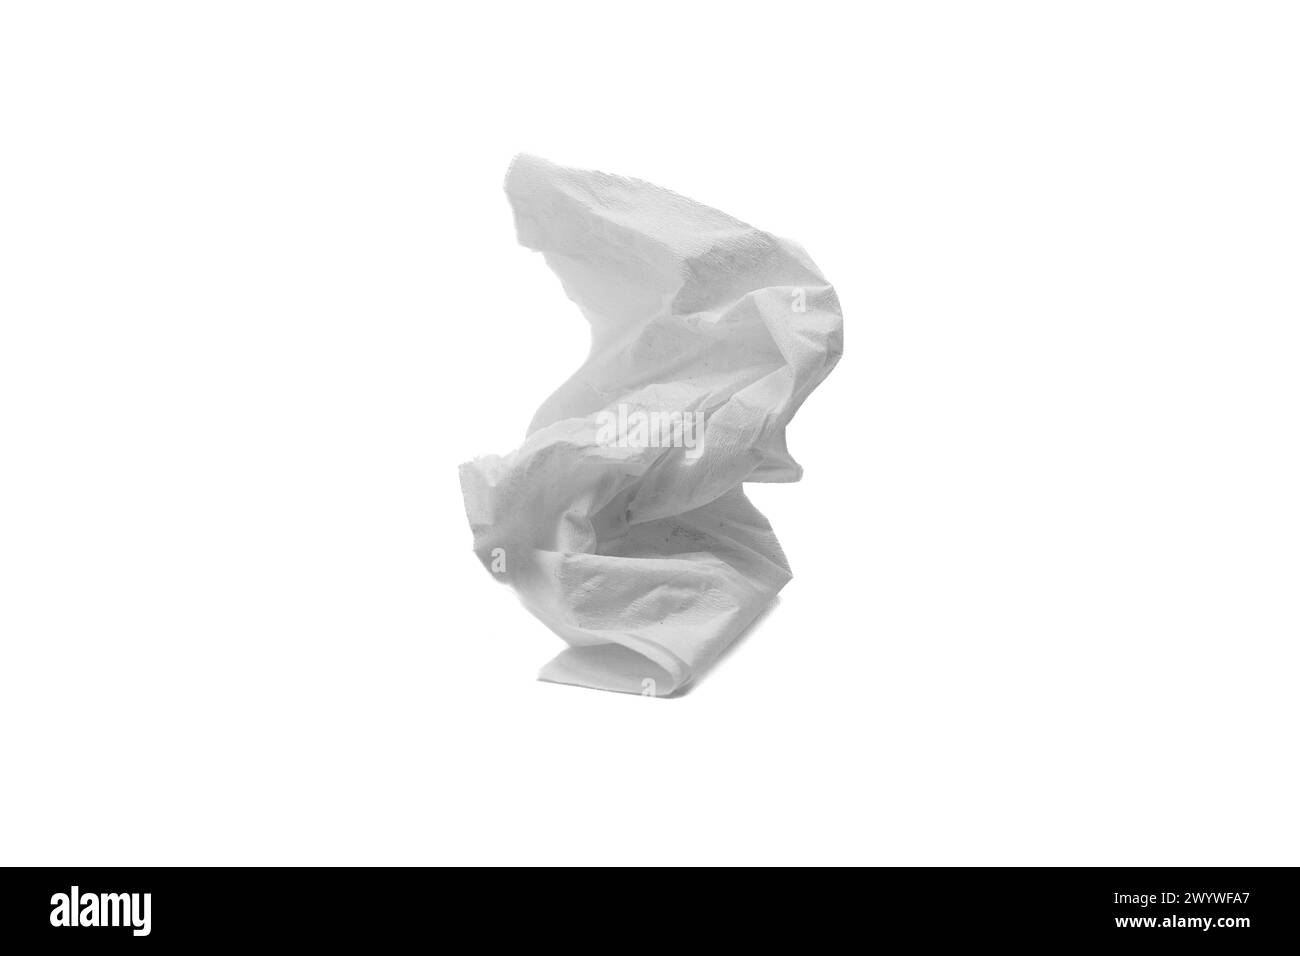 Crumpled tissue paper. Used screwed paper tissue isolated on white background. Personal hygiene Stock Photo